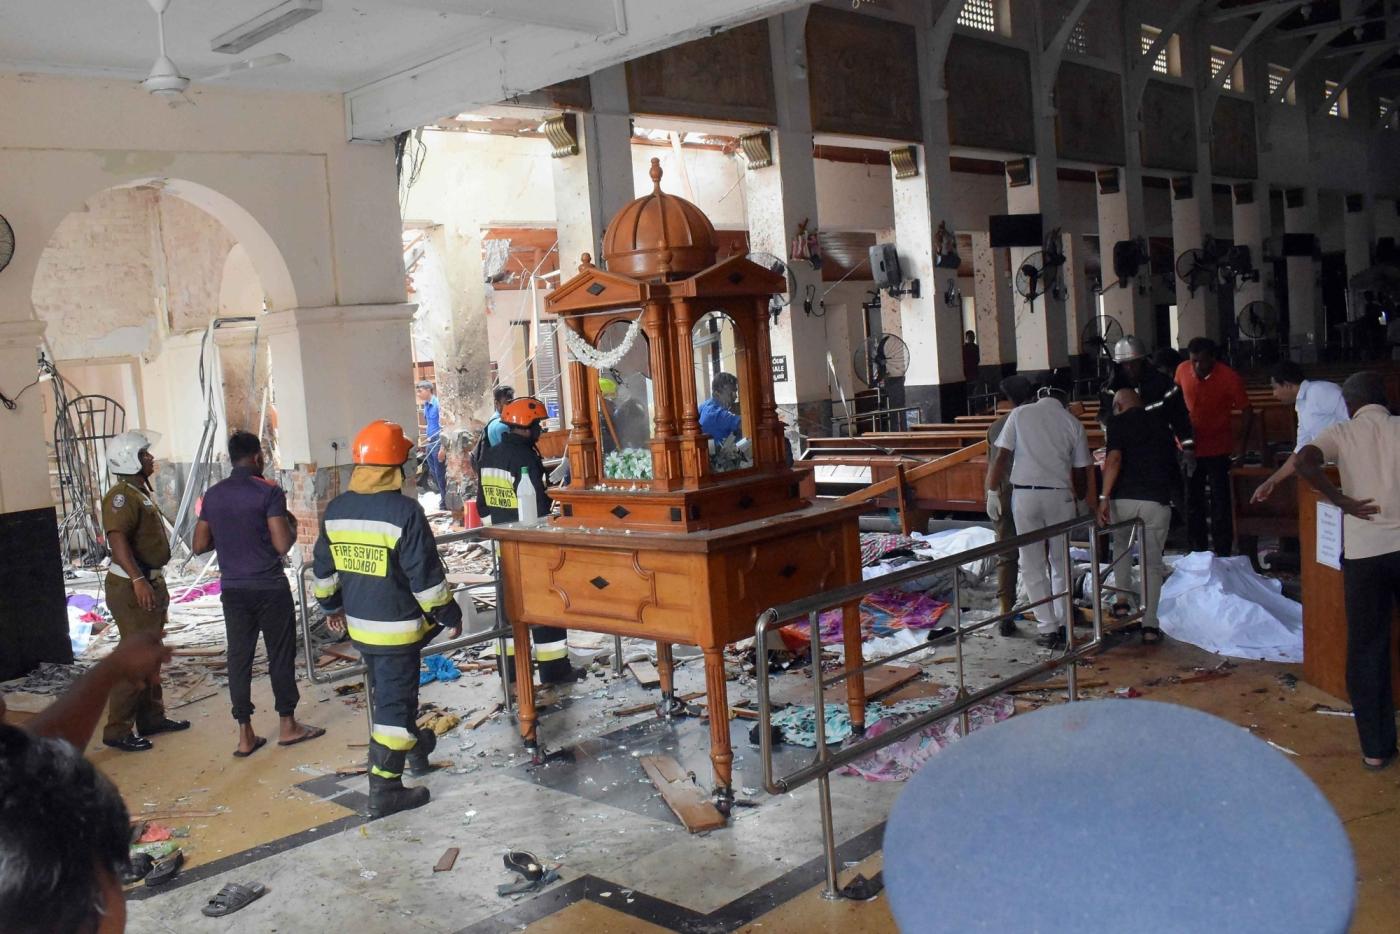 Colombo, April 22, 2019 (Xinhua) -- People work at a blast scene at St. Anthony's Church in Kochchikade in Colombo, Sri Lanka, April 21, 2019. The death toll from the multiple blasts that ripped through Sri Lanka on Sunday rose to 228 while 450 others were injured, local media quoting hospital sources said. (Xinhua/Wang Shen/IANS) by . 